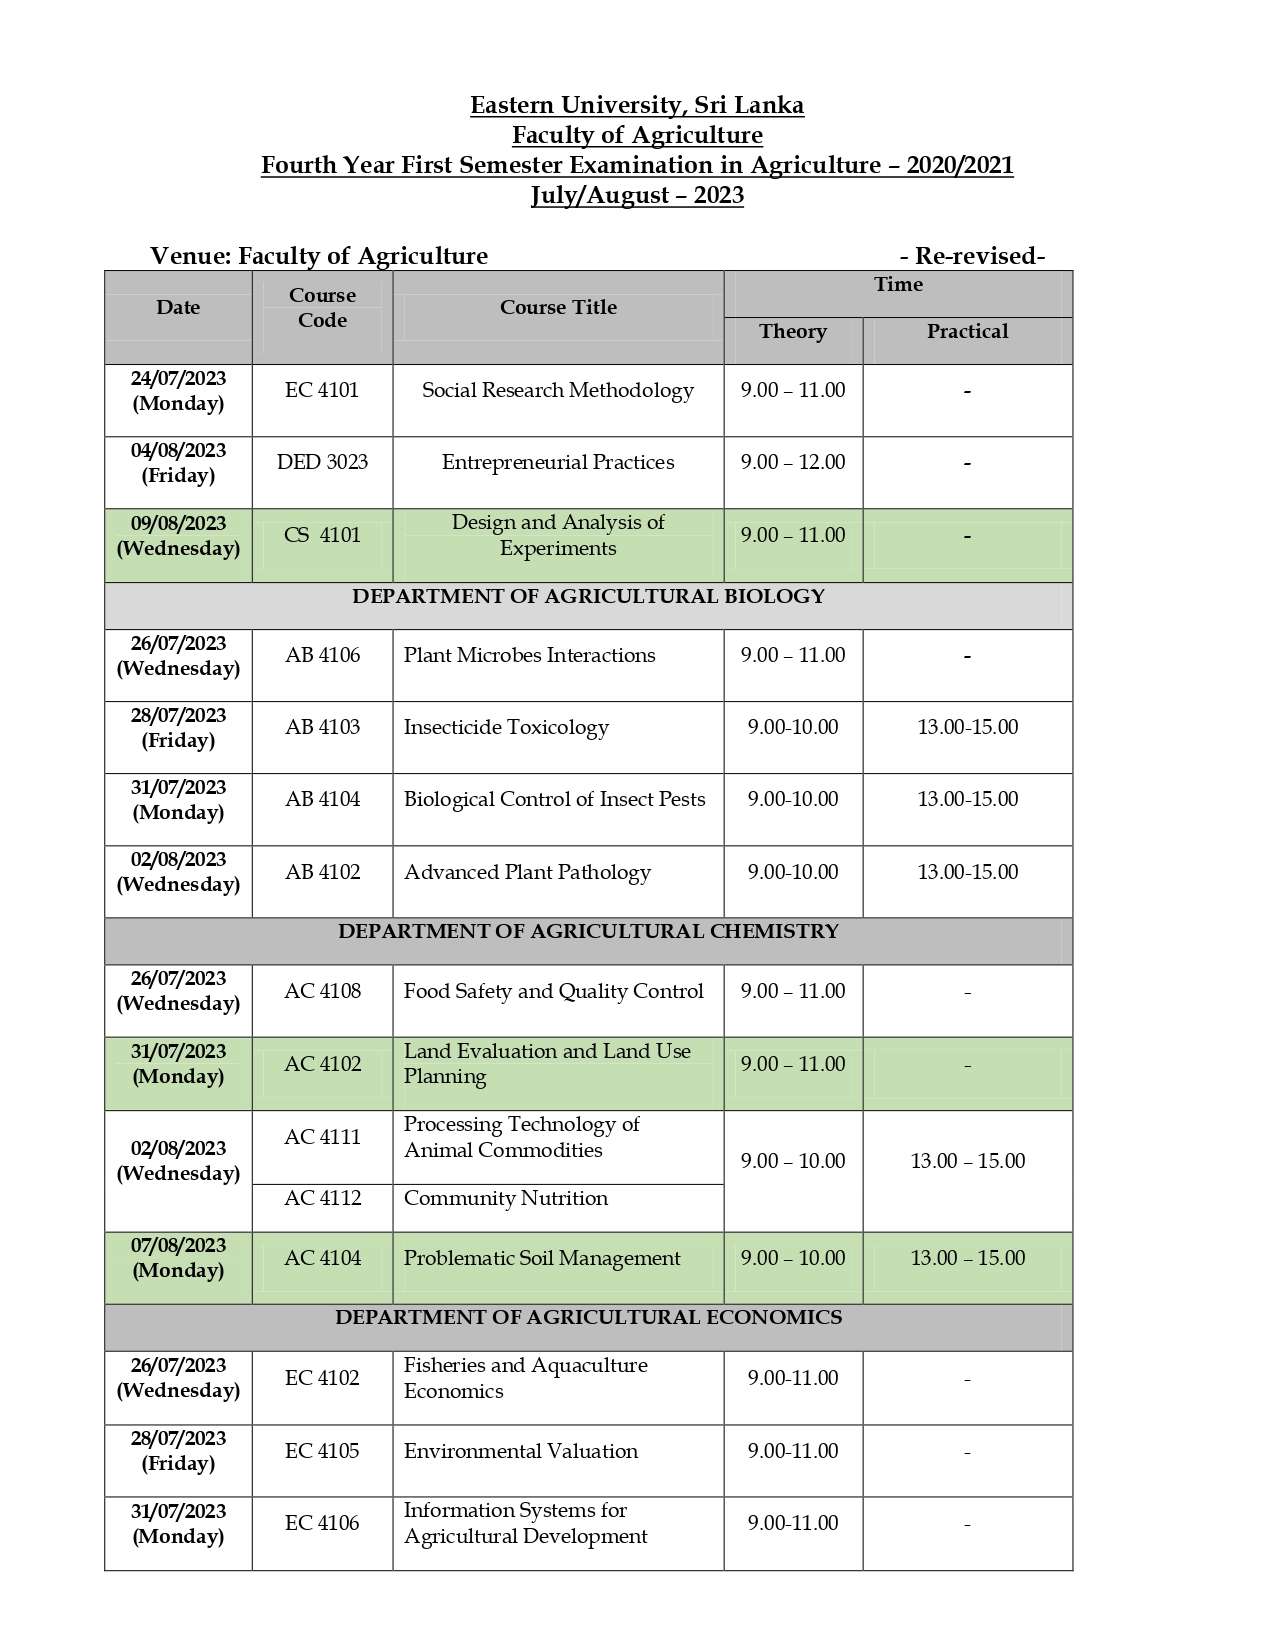 Fourth Year First Semester Examination Timetable - 202021_rerevised version_page-0001.jpg